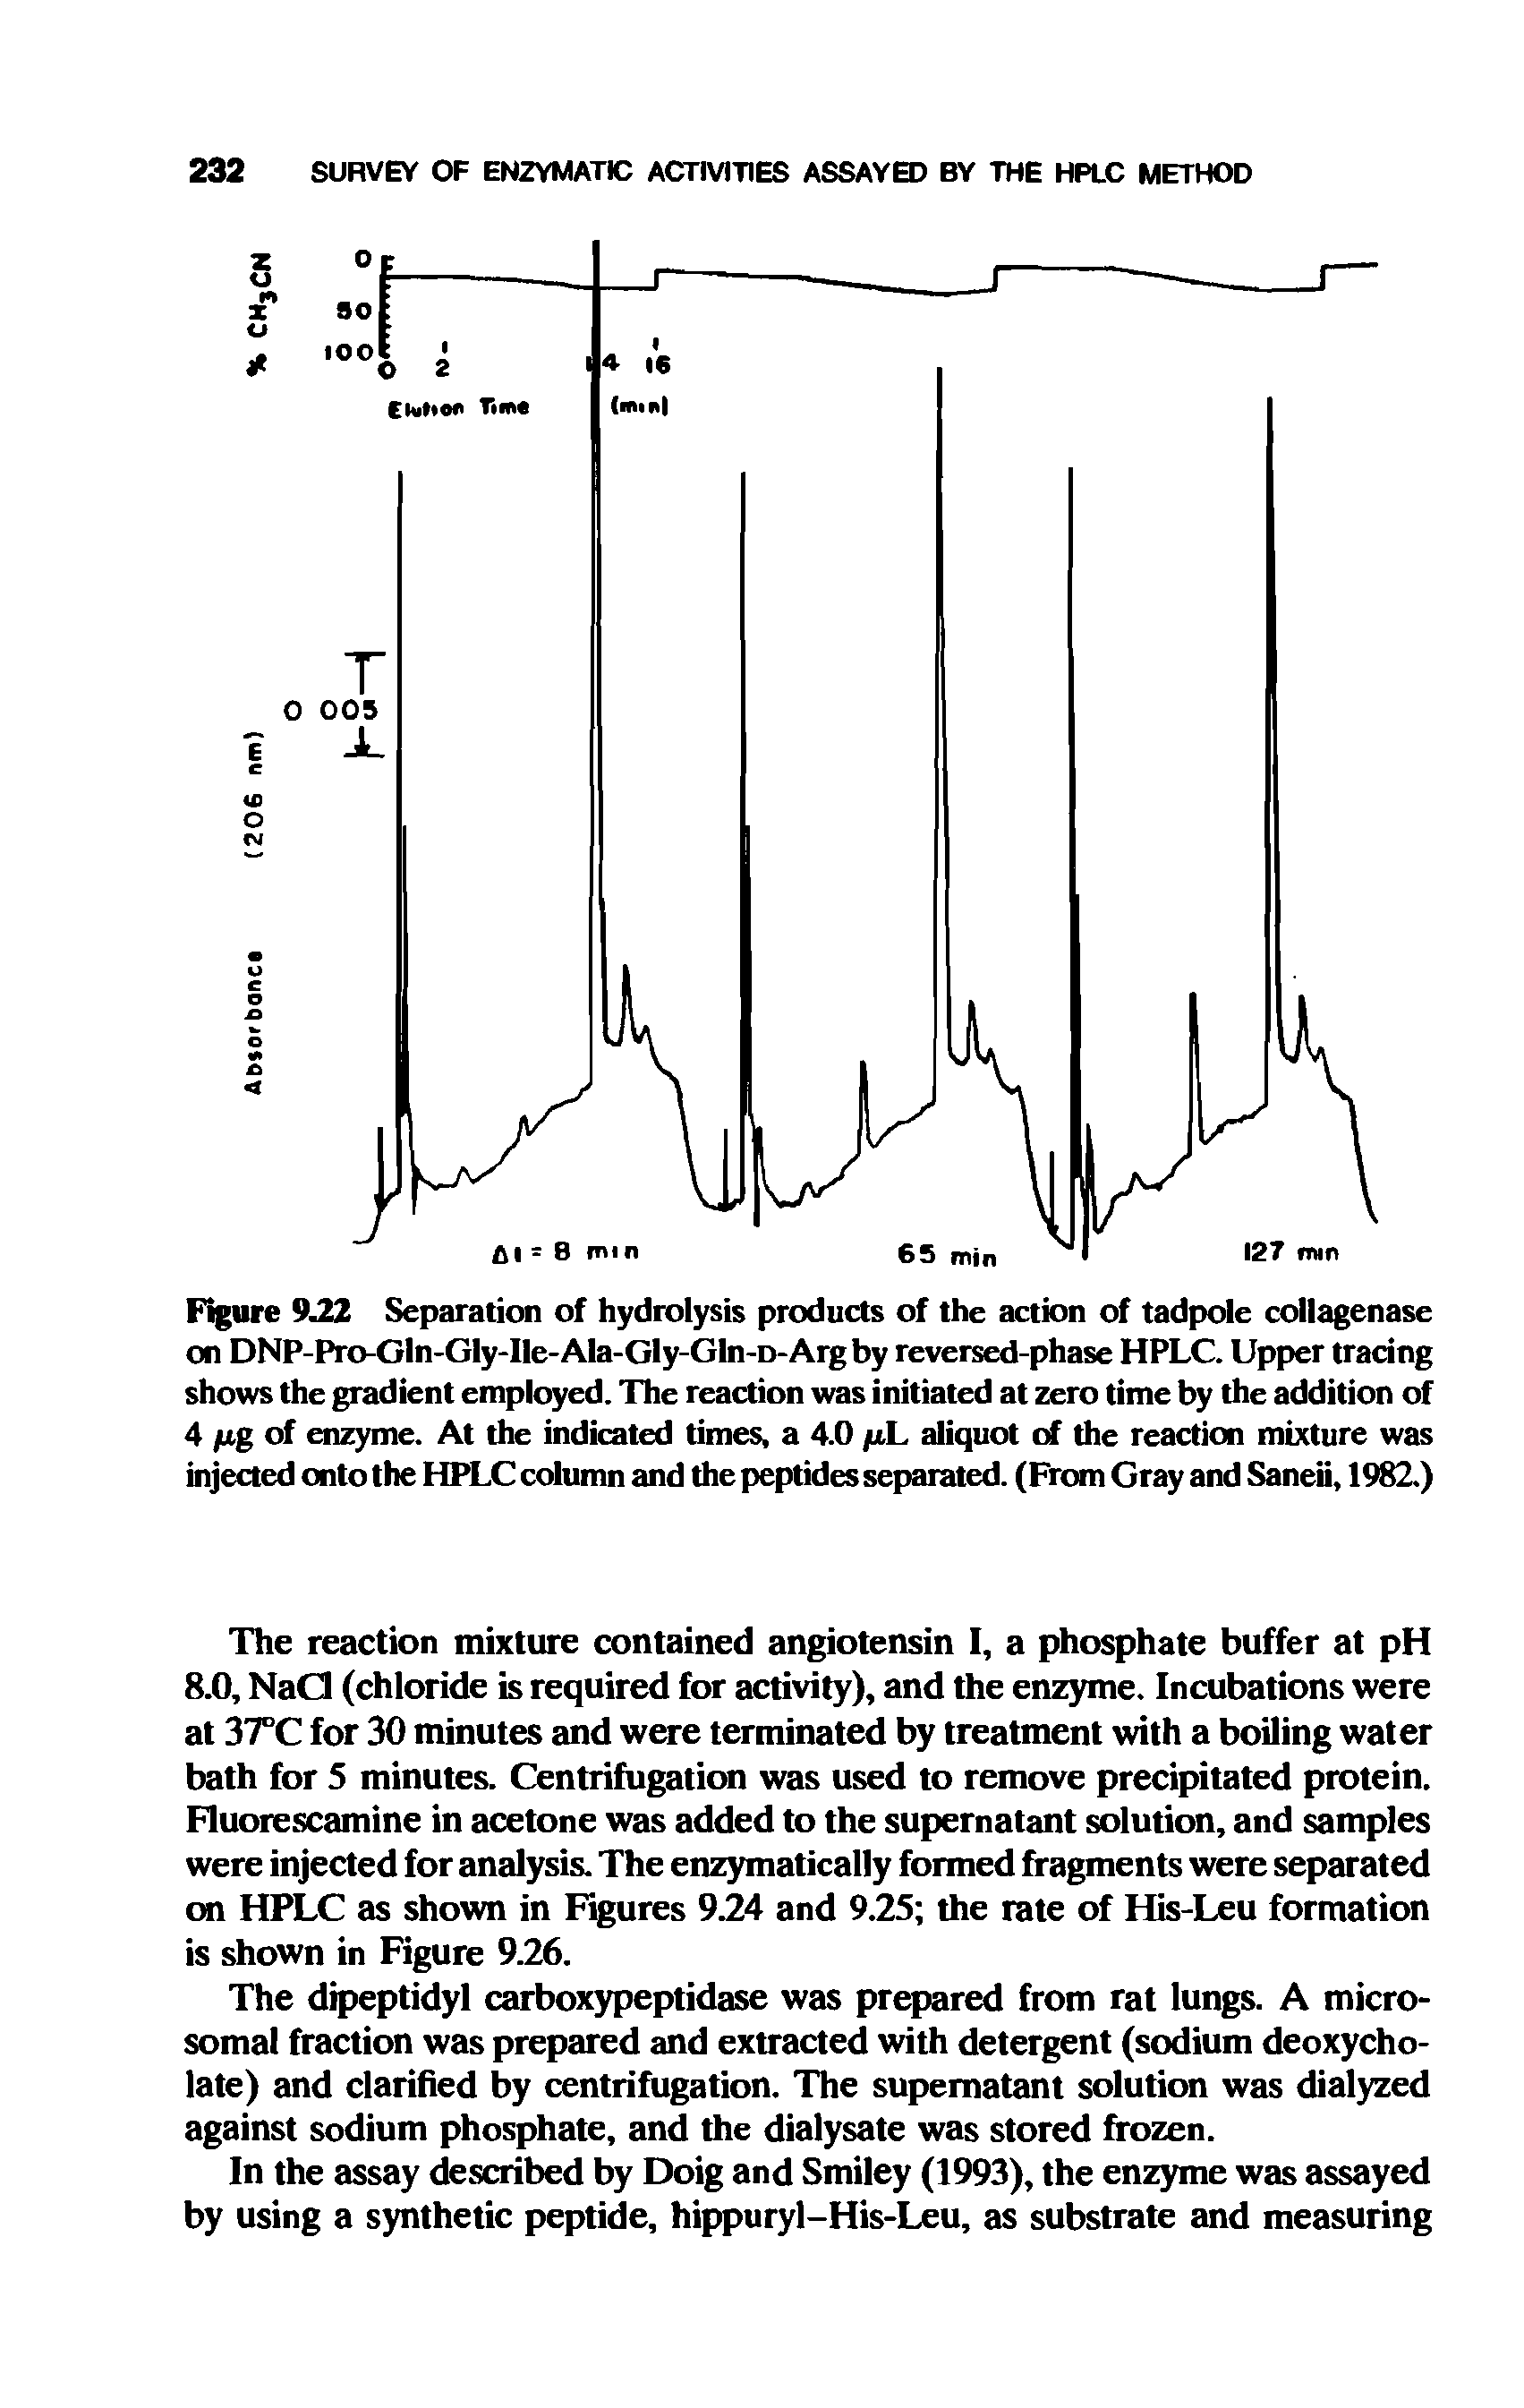 Figure 9.22 Separation of hydrolysis products of the action of tadpole collagenase on DNP-Pro-Gln-Gly-Ile-Ala-Gly-Gln-D-Argby reversed-phase HPLC. Upper tracing shows the gradient employed. The reaction was initiated at zero time by the addition of 4 /xg of enzyme. At the indicated times, a 4.0 /xL aliquot erf the reaction mixture was injected onto the HPLC column and the peptides separated. (From Gray and Saneii, 1982.)...